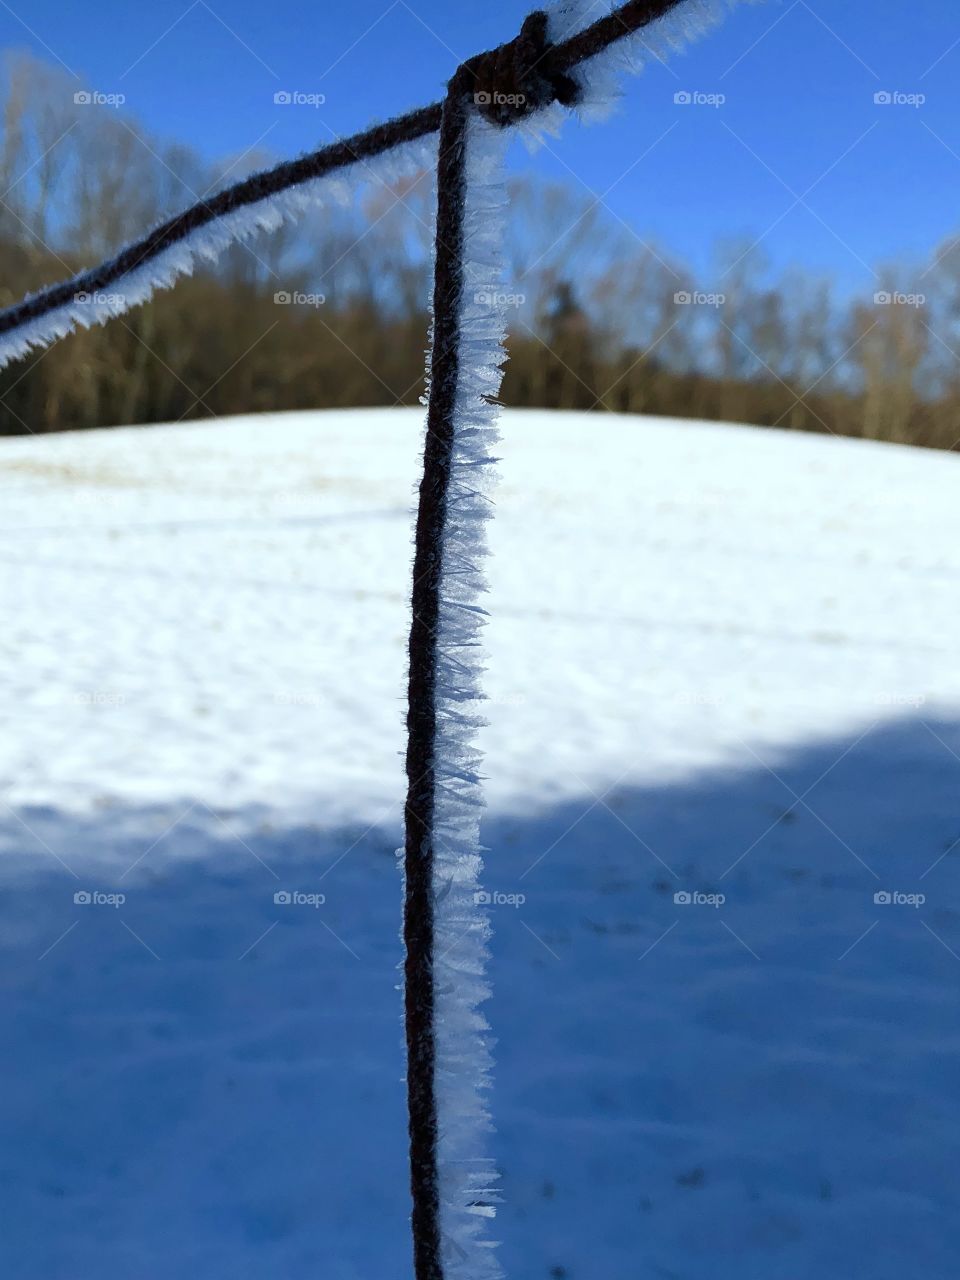 Ice crystals on a metal fence